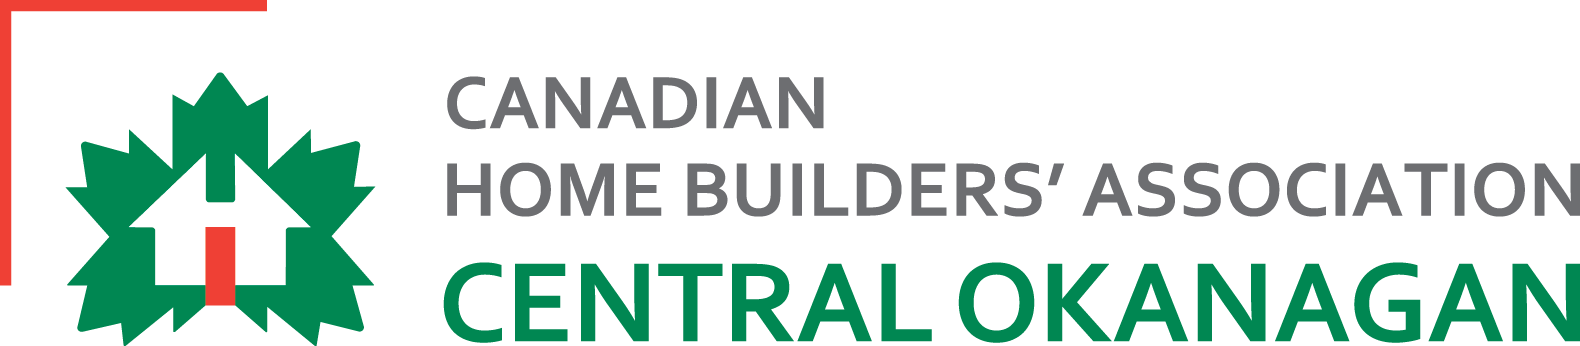 Canadian Home Builders Association Central Okanagan logo in red, green, and grey